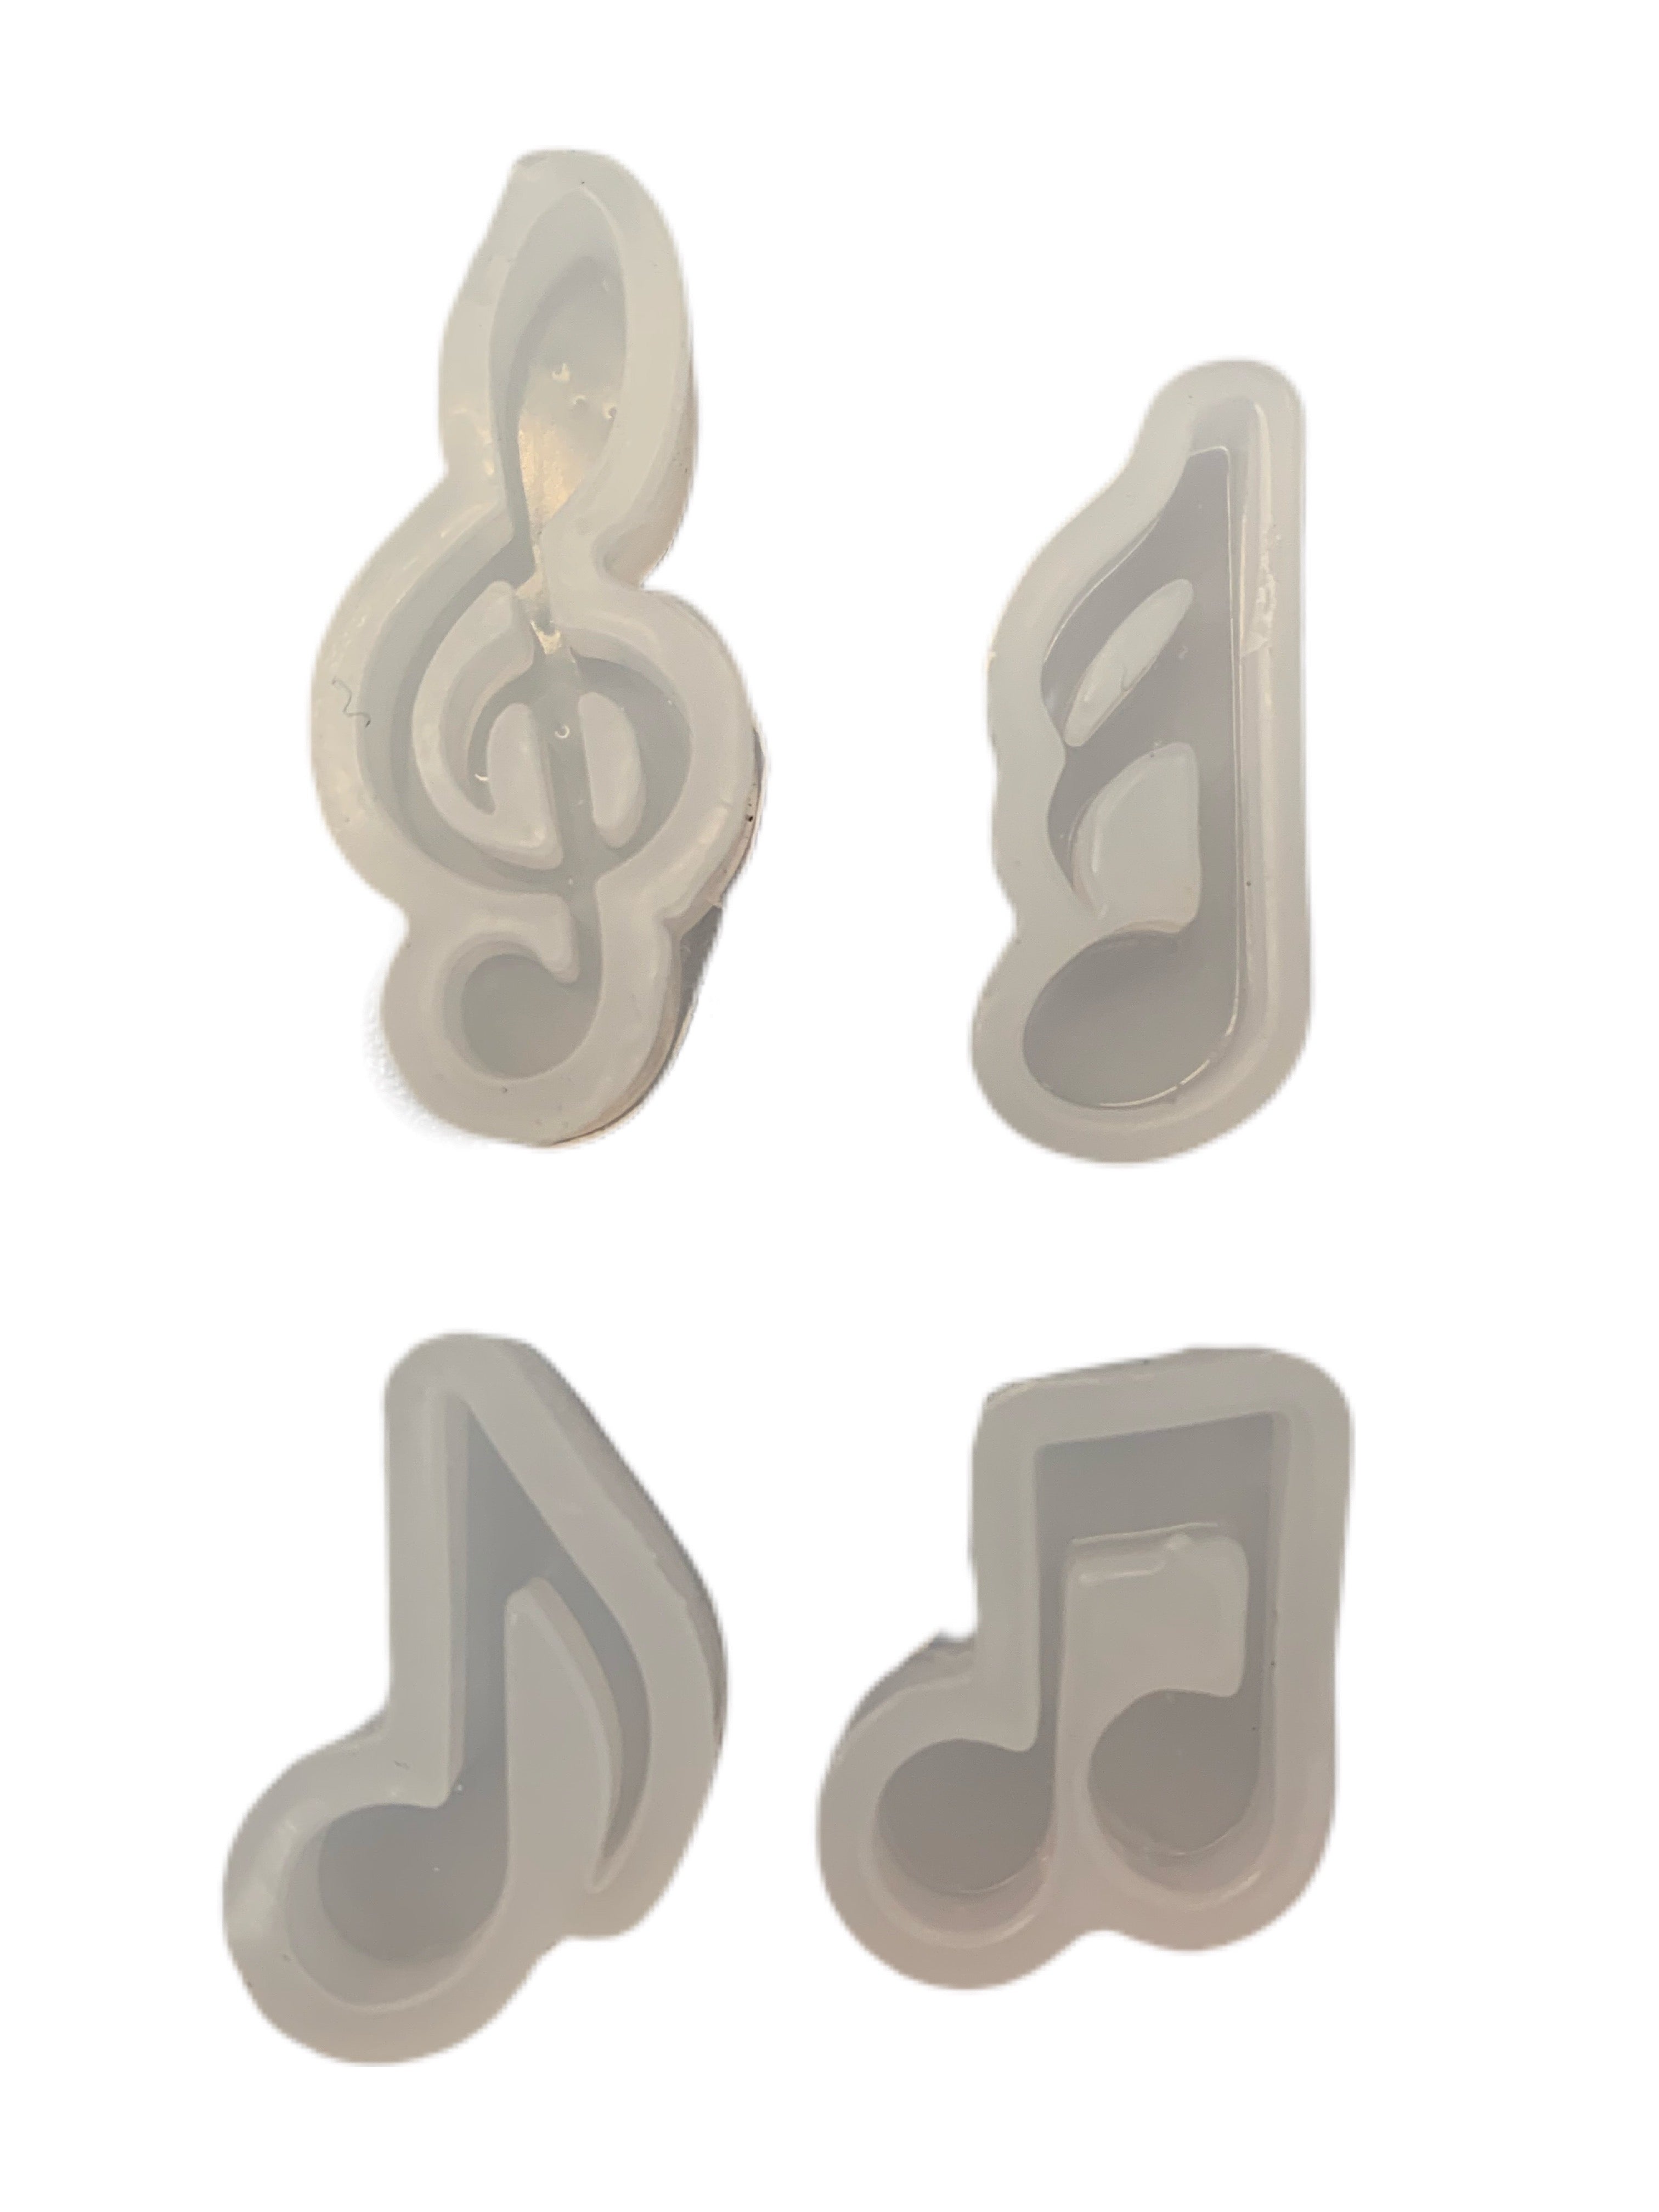 Music Theme Notes Set of 4 Music Note and Treble Clef Sugarcraft Mould - The Cooks Cupboard Ltd